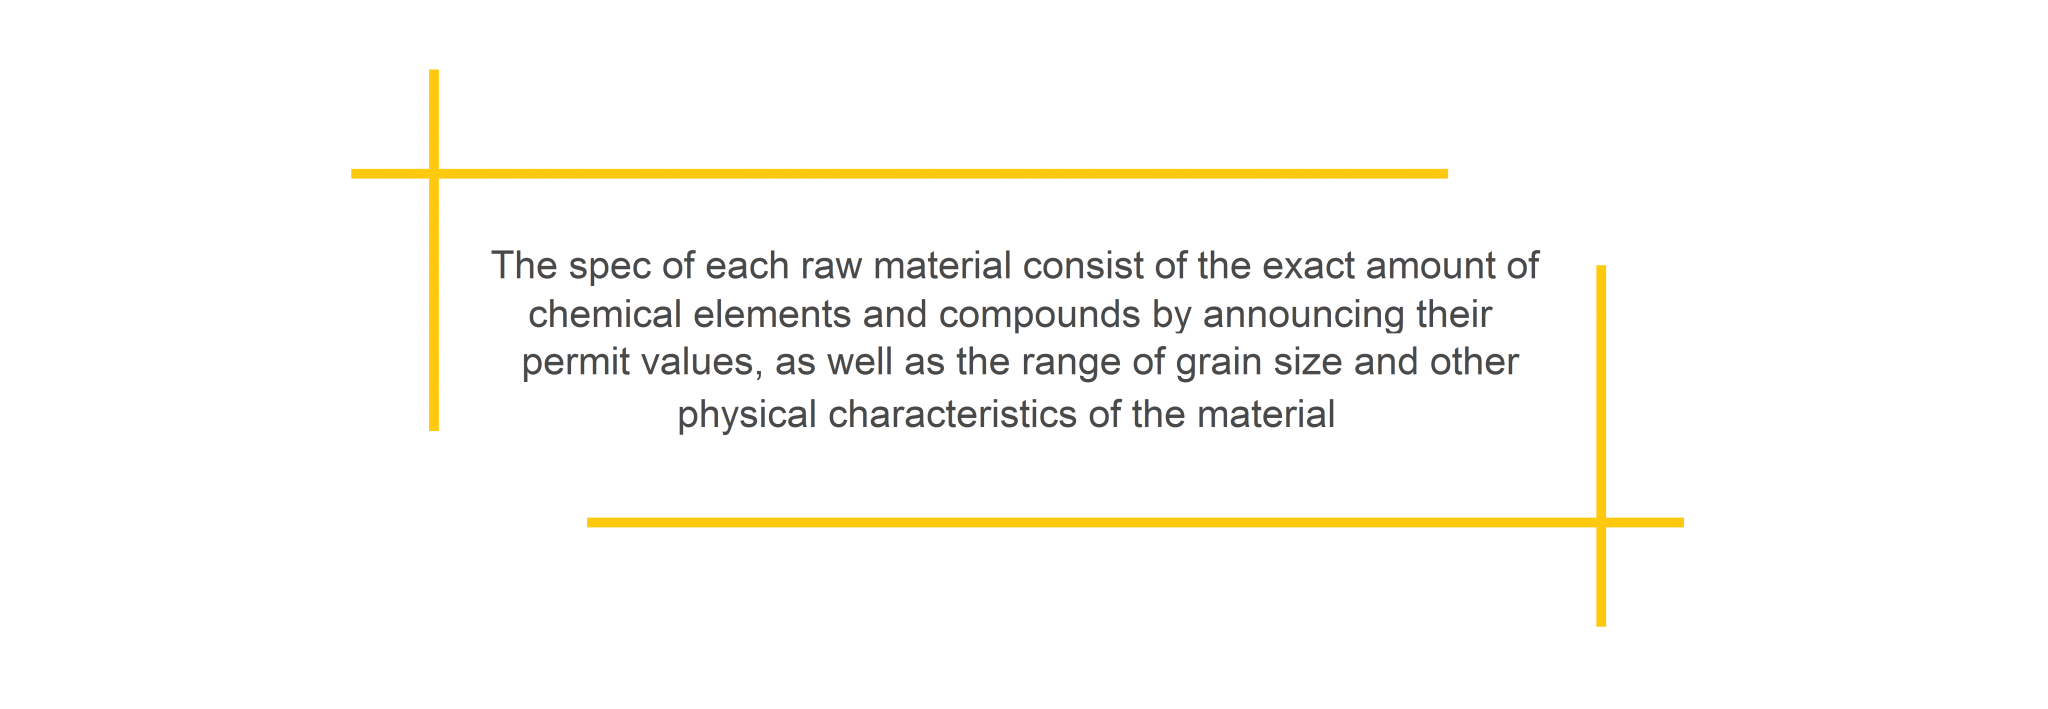 Specification of Raw Material